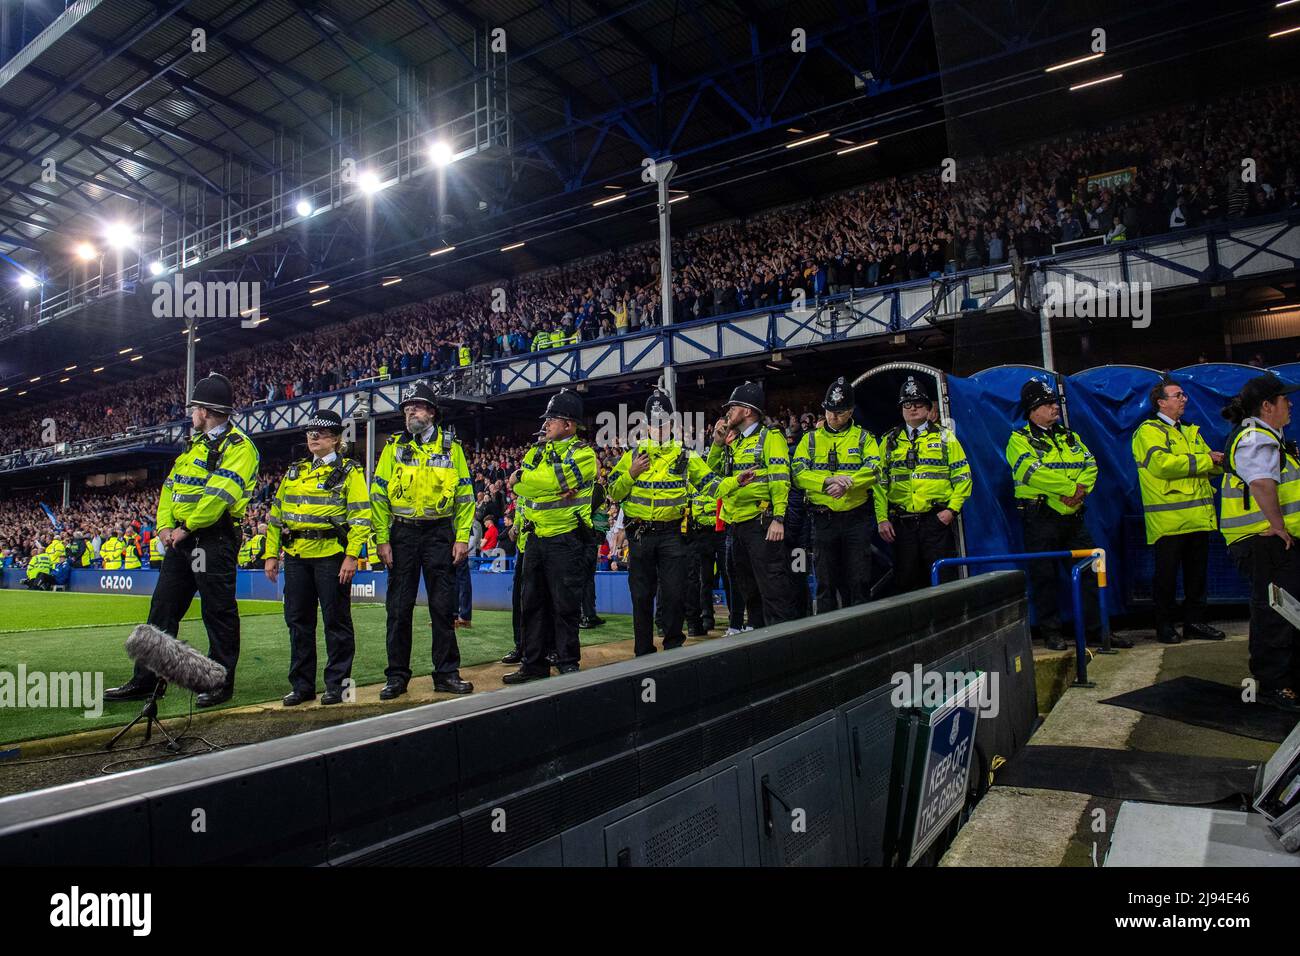 LIVERPOOL, ENGLAND - MAY 19: Police during the Premier League match between Everton and Crystal Palace at Goodison Park on May 19, 2022 in Liverpool, United Kingdom. (Photo by Sebastian Frej) Stock Photo